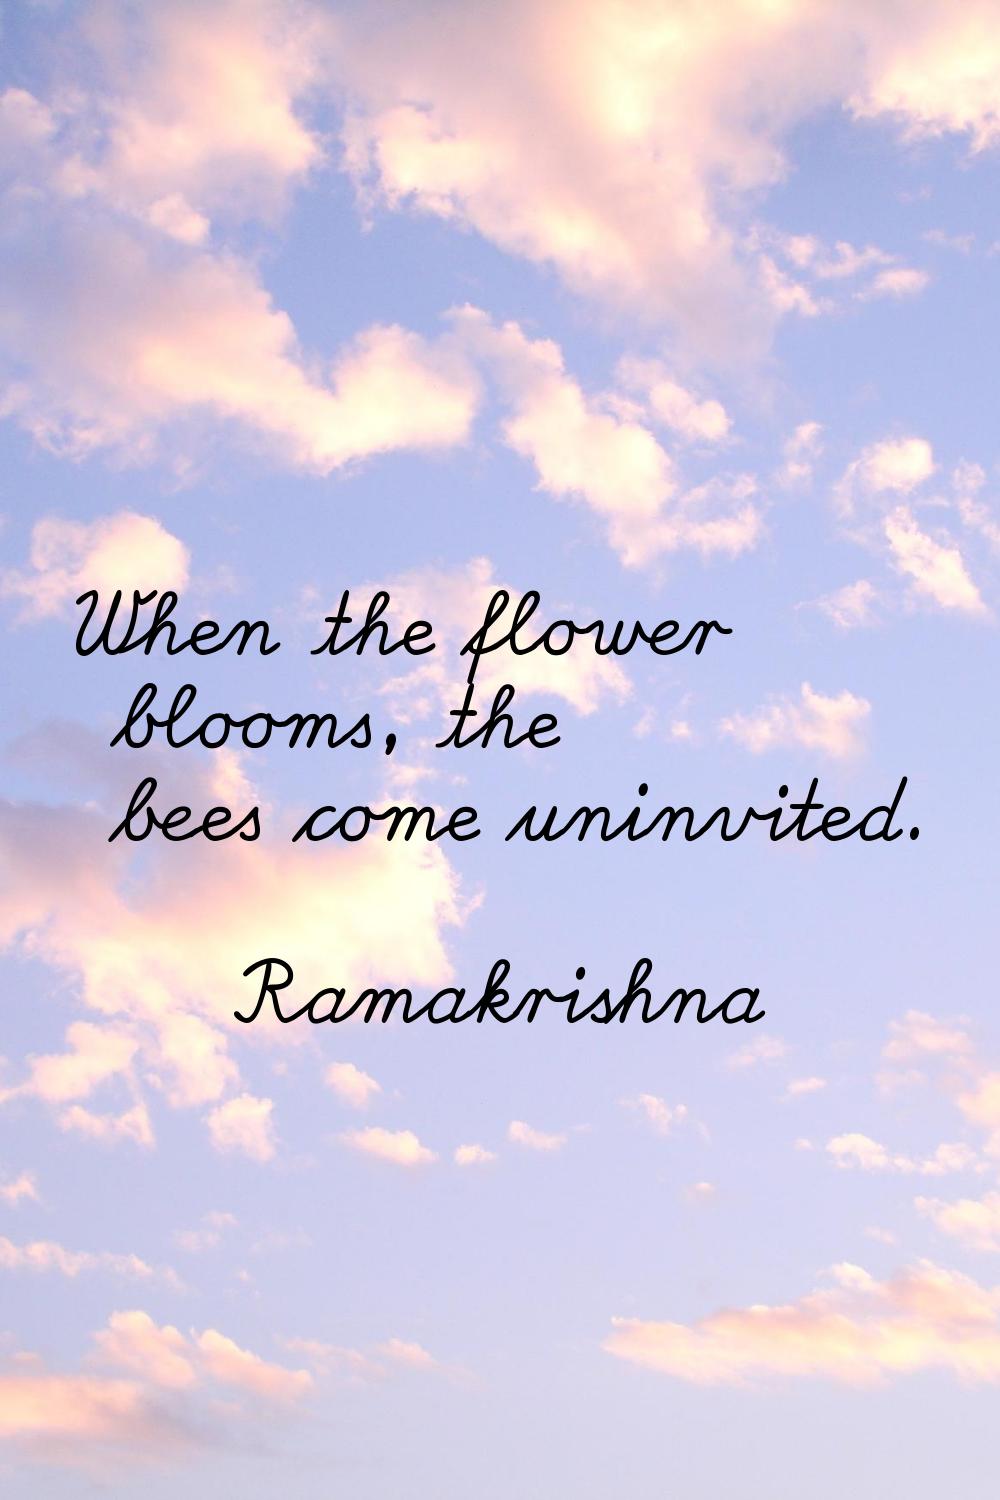 When the flower blooms, the bees come uninvited.